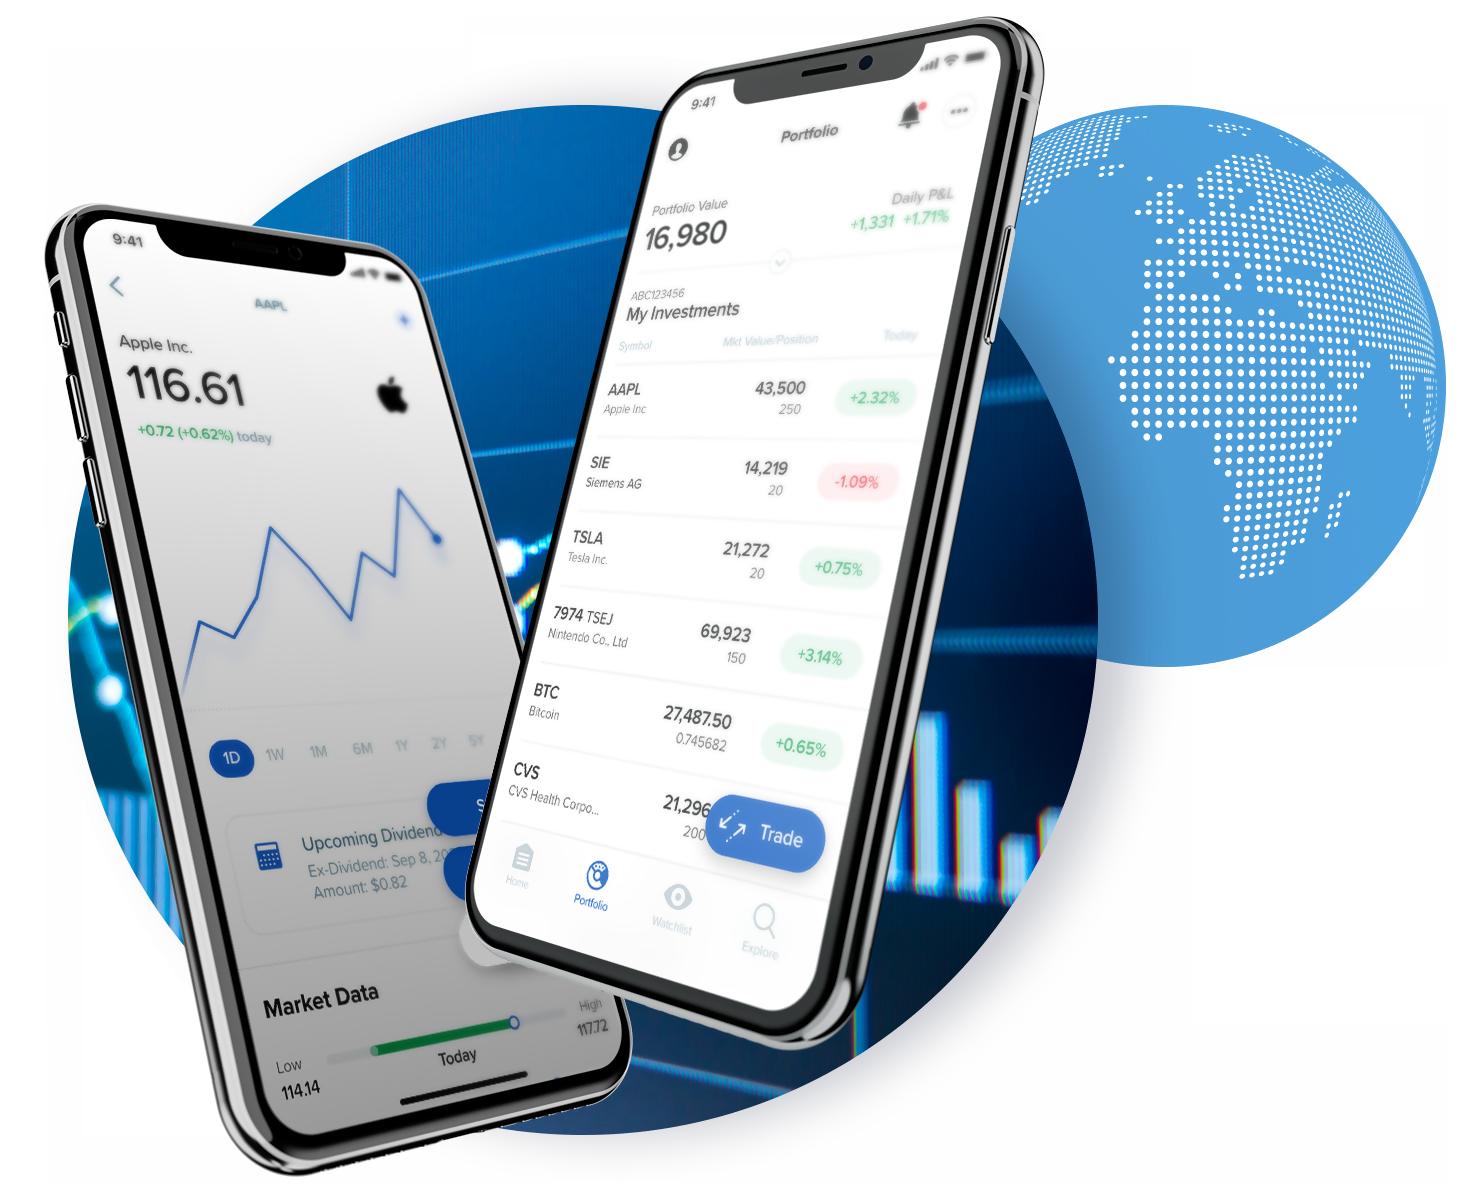 Put the World in the Palm of Your Hand with IBKR GlobalTrader